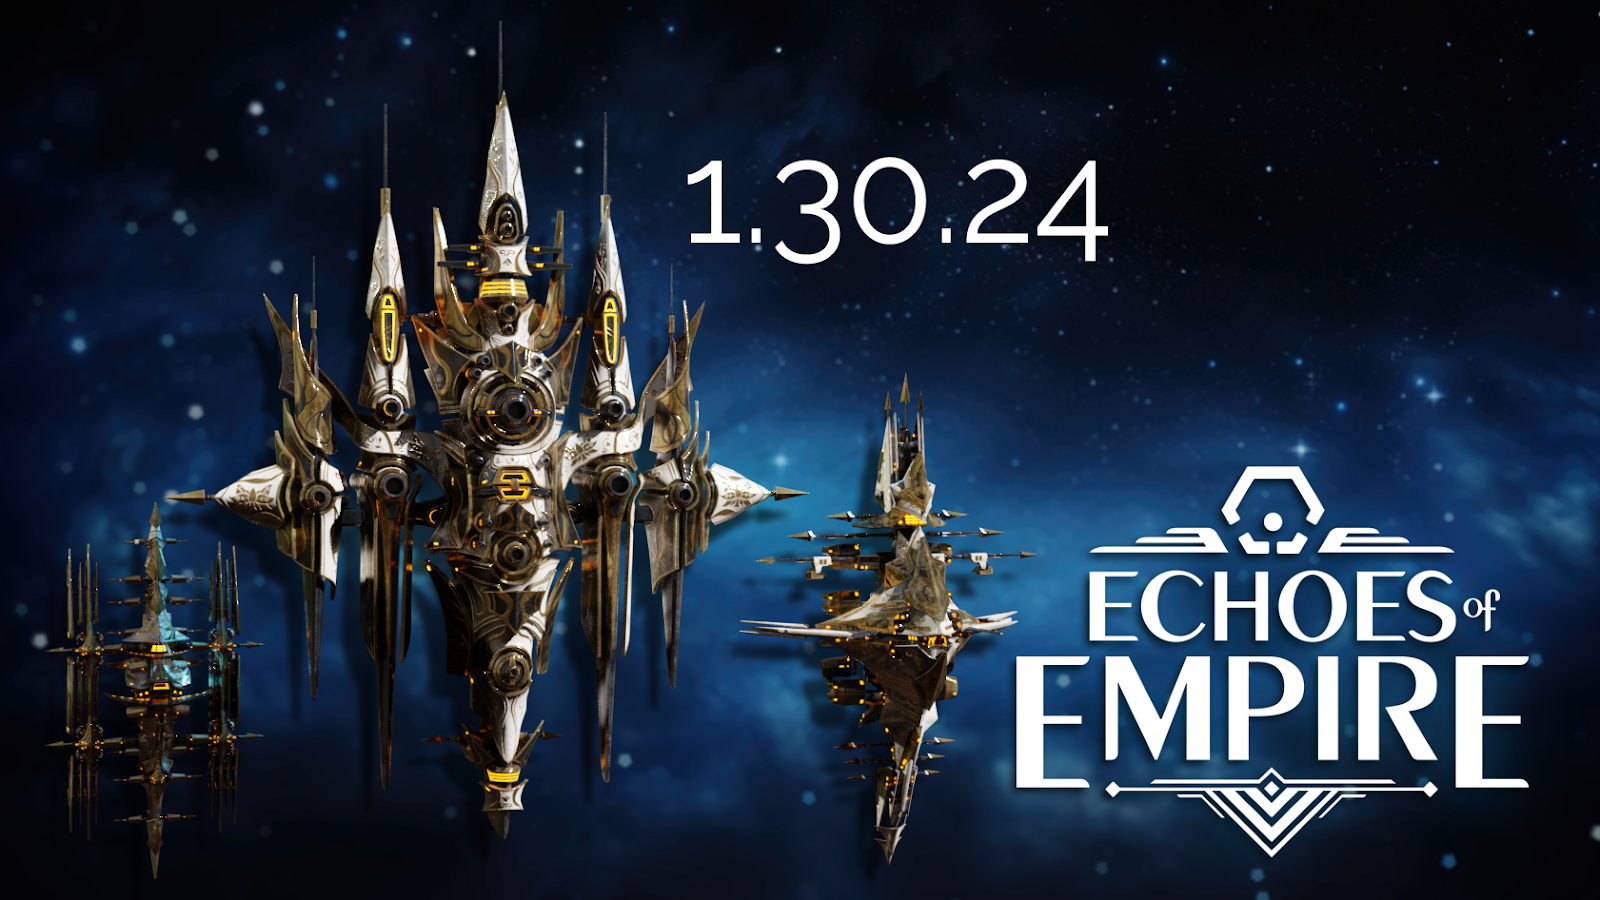 Echoes of Empire is a sci fi 4x adventure that launches on January 30th, 2024 from Gala Games.